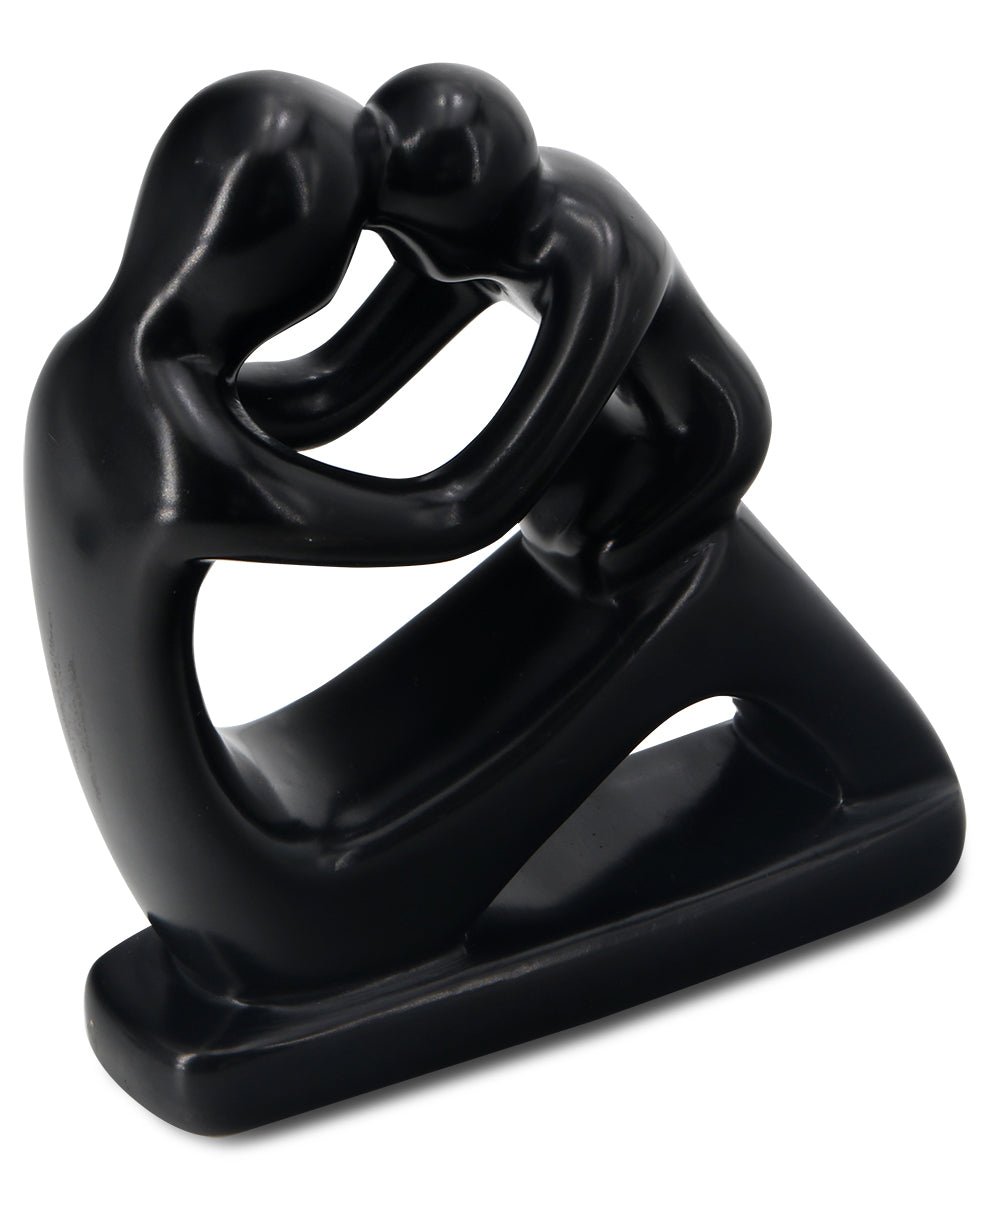 Abstract Mother and Baby Soapstone Statue, Crafted in Kenya - Sculptures & Statues Black